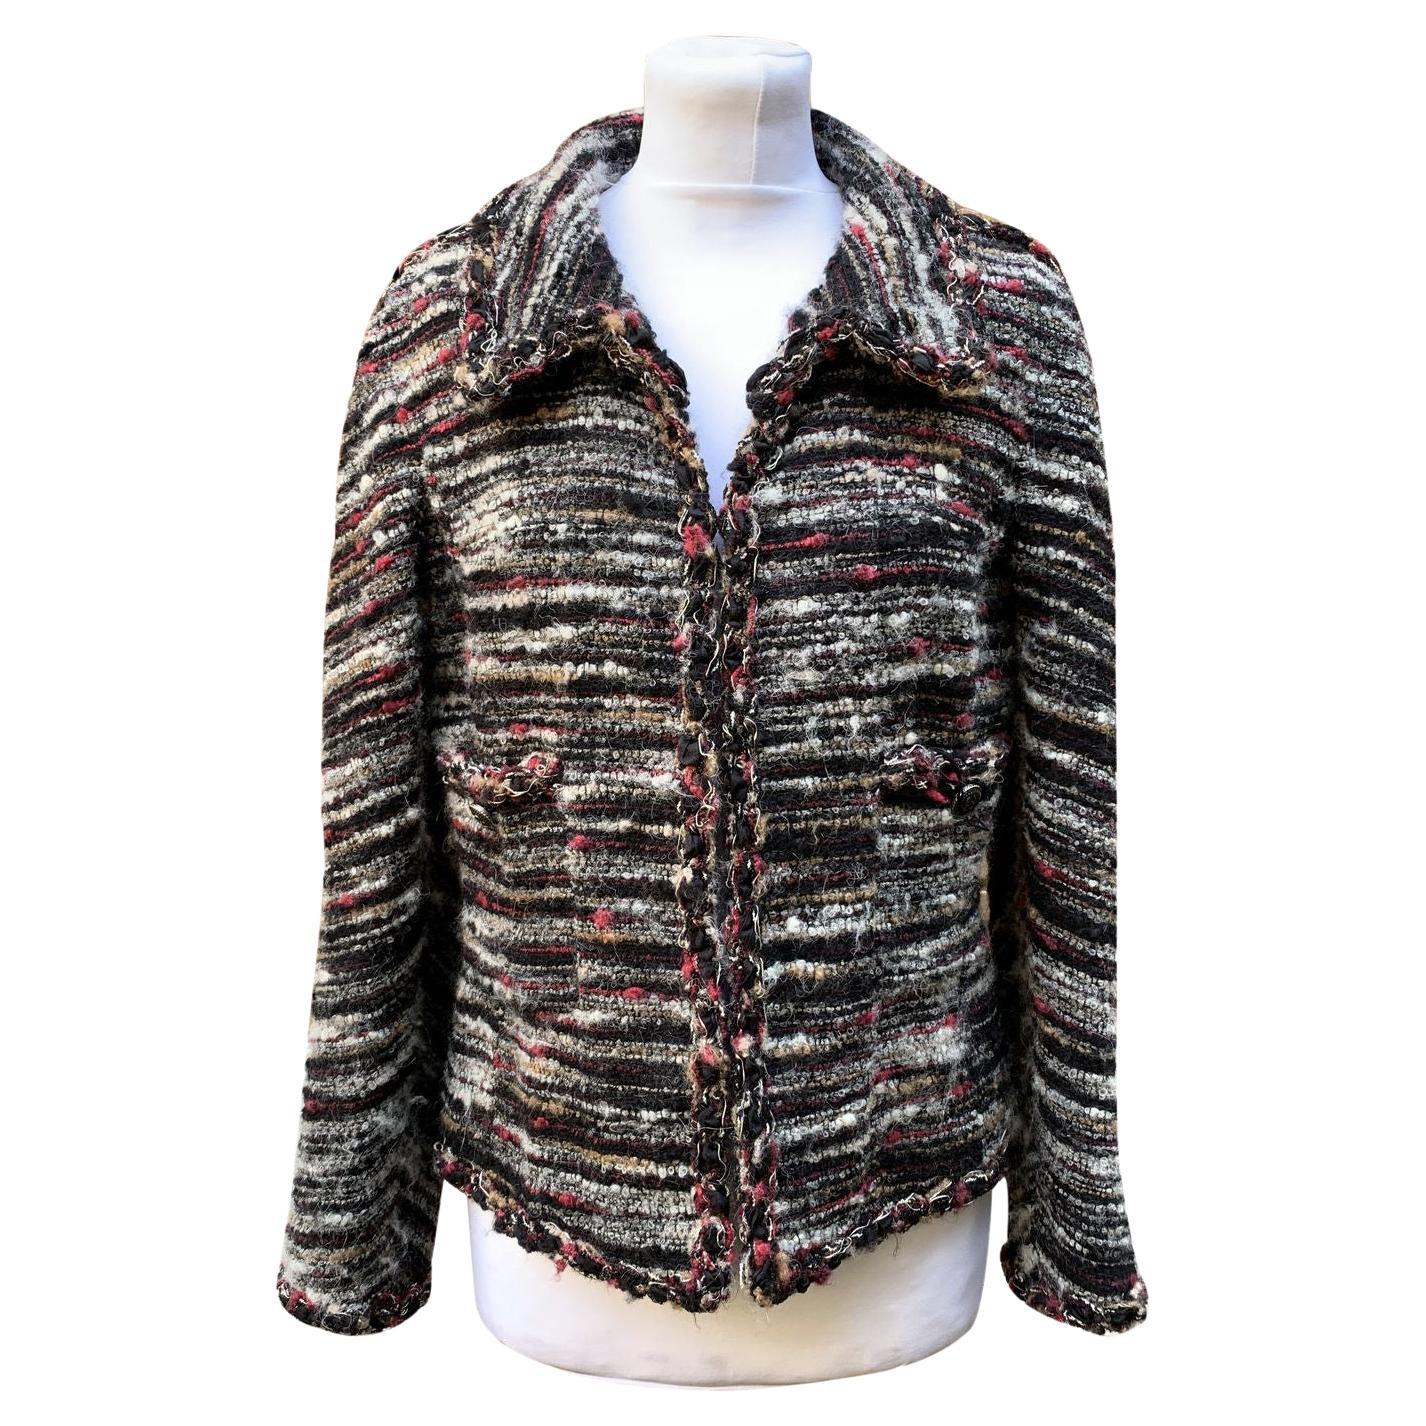 Chanel 2011 Multicolor Wool Jacket Cardigan Size 38 FR For Sale